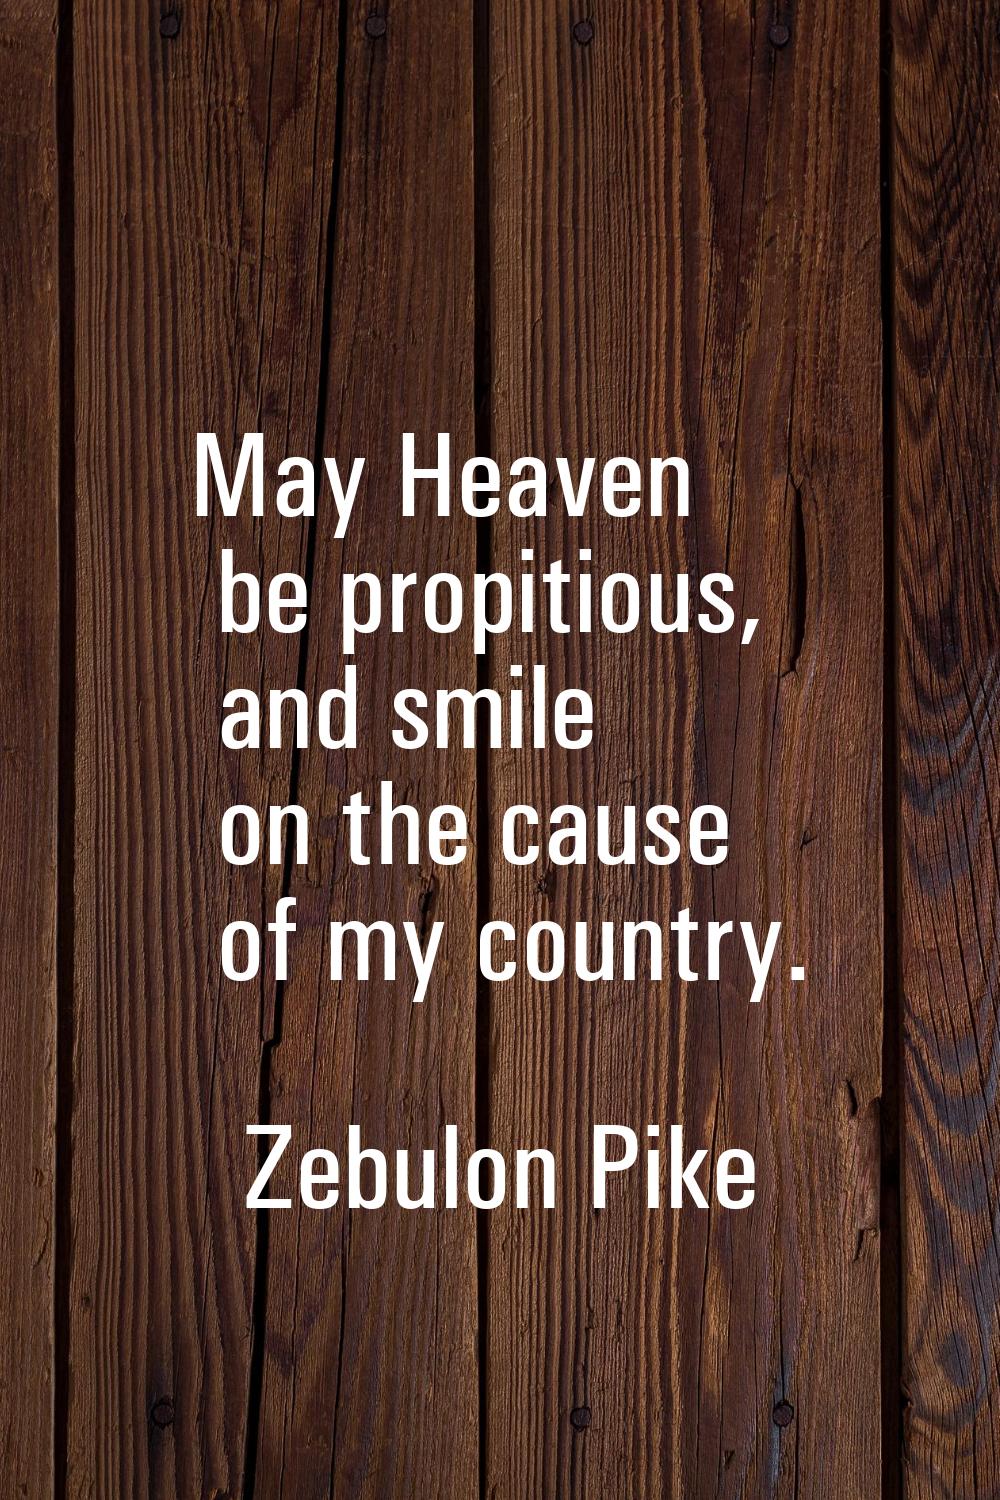 May Heaven be propitious, and smile on the cause of my country.